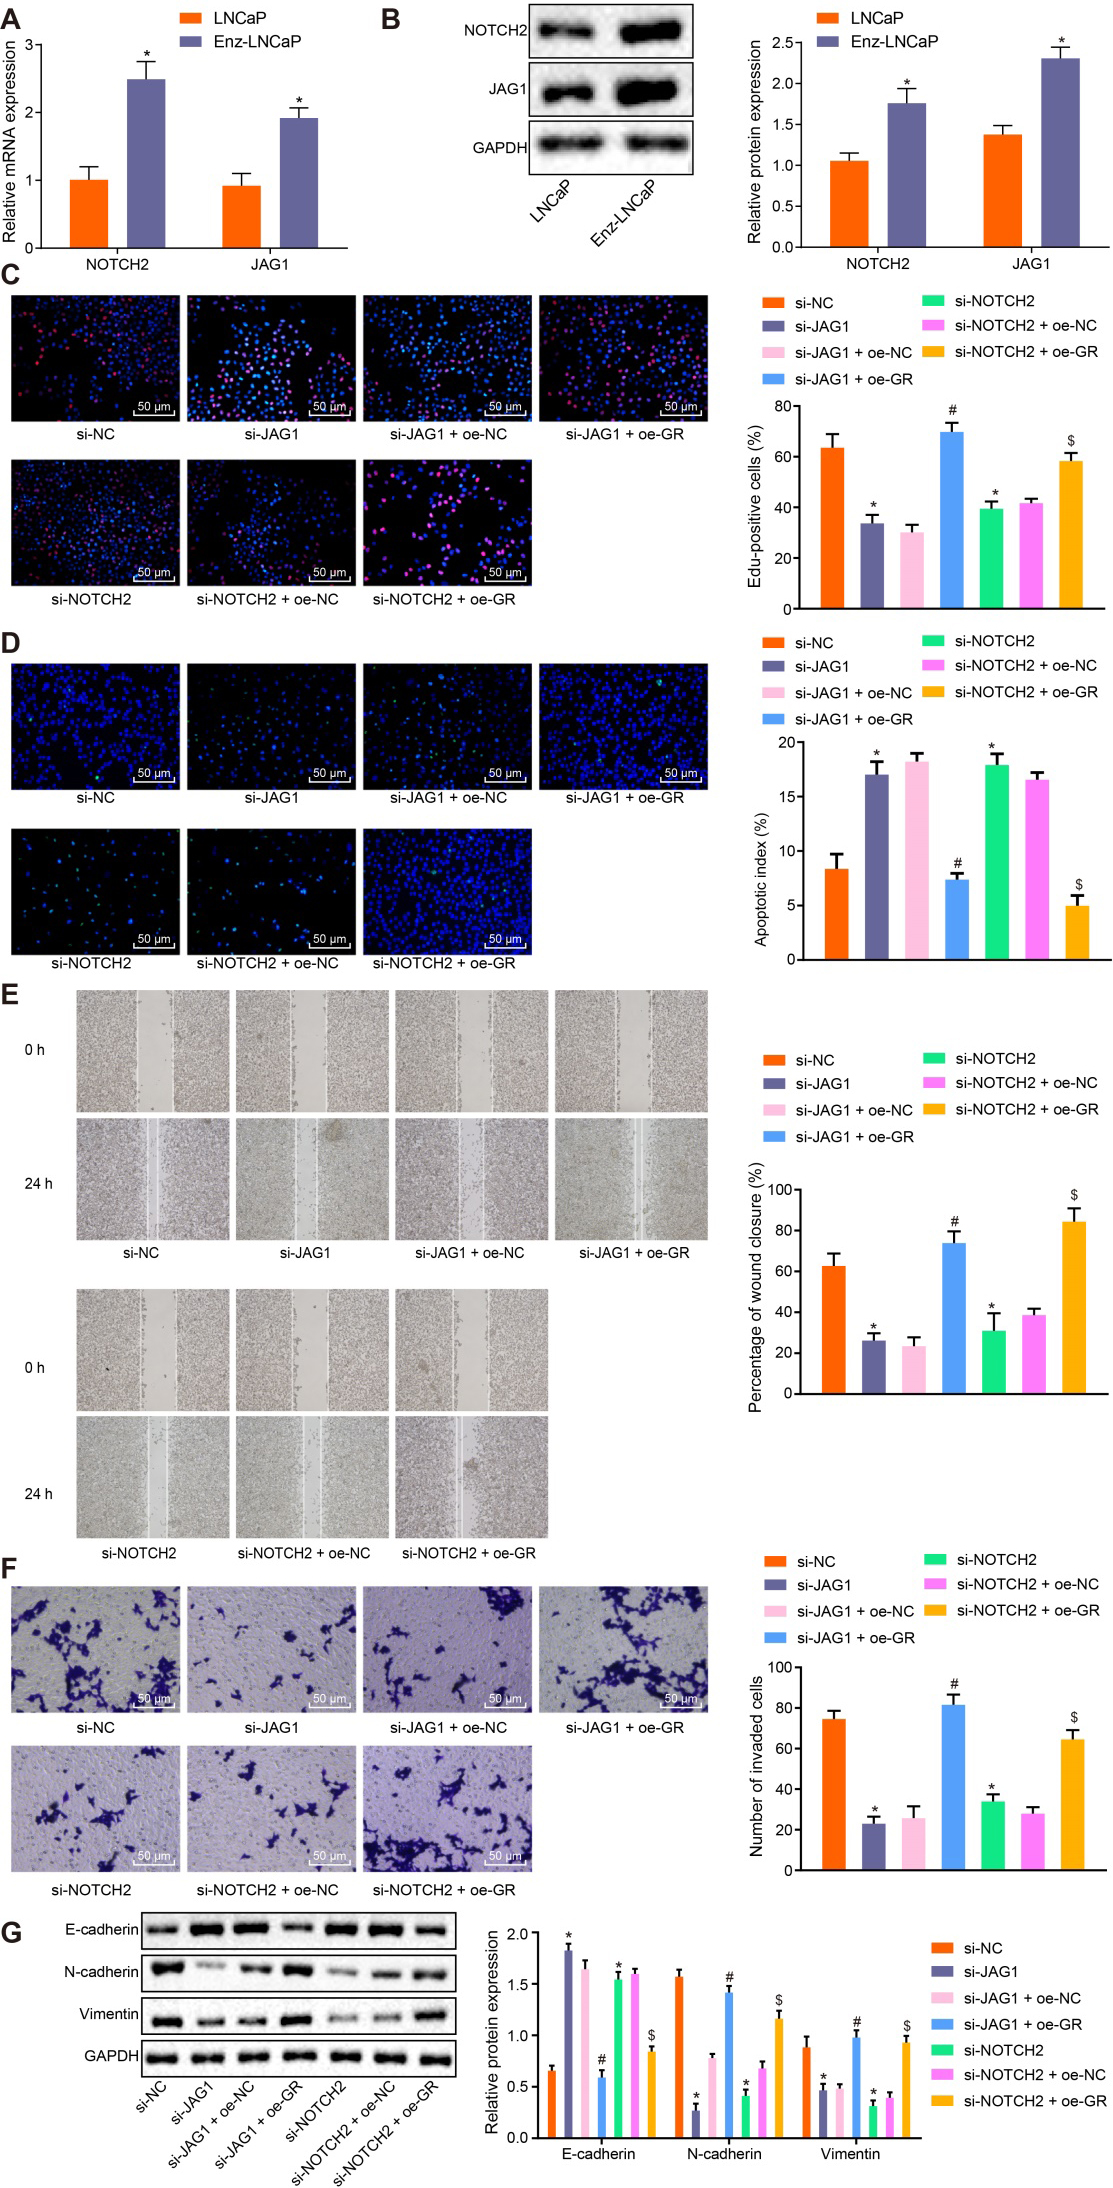 GR/miR-143-3p/JAG1/NOTCH2 axis involves in the progression of CRPC. A, The expression of JAG1/NOTCH2 in LNCaP and Enz-LNCaP cells determined by RT-qPCR, p*< 0.05 compared with LNCaP cells. B, Grey value analysis and quantification of JAG1/NOTCH2 protein normalized to GAPDH in LNCaP and Enz-LNCaP cells by Western blot analysis, p*< 0.05 compared with LNCaP cells. C, EdU assay was applied for detecting cell proliferation (200 ×, scale: 50 μm). D, TUNEL assay was conducted for detecting cell apoptosis (200 ×, scale: 50 μm). E, Detection of cell migration ability by wound healing assay. F, Detection of cell invasion ability by Transwell assay (200 ×, scale: 50 μm). G, Western blot analysis was performed to detect the protein expression of JAG1, NOTCH2, E-cadherin, N-cadherin and Vimentin normalized to GAPDH. In panel C, D, E, F, G, p*< 0.05 compared with cells treated with si-NC, p#< 0.05 compared with cells treated with si-JAG1 and oe-NC, p$< 0.05 compared with cells treated with si-NOTCH2 and oe-NC. The measurement data were expressed as mean ± standard deviation. The unpaired t-test was used to compare the data of the two groups of unpaired designs that followed normal distribution and homogeneity of variance. Data among multiple groups were analyzed by one-way ANOVA, followed by Tukey’s post hoc test. The cell experiment was repeated three times independently.